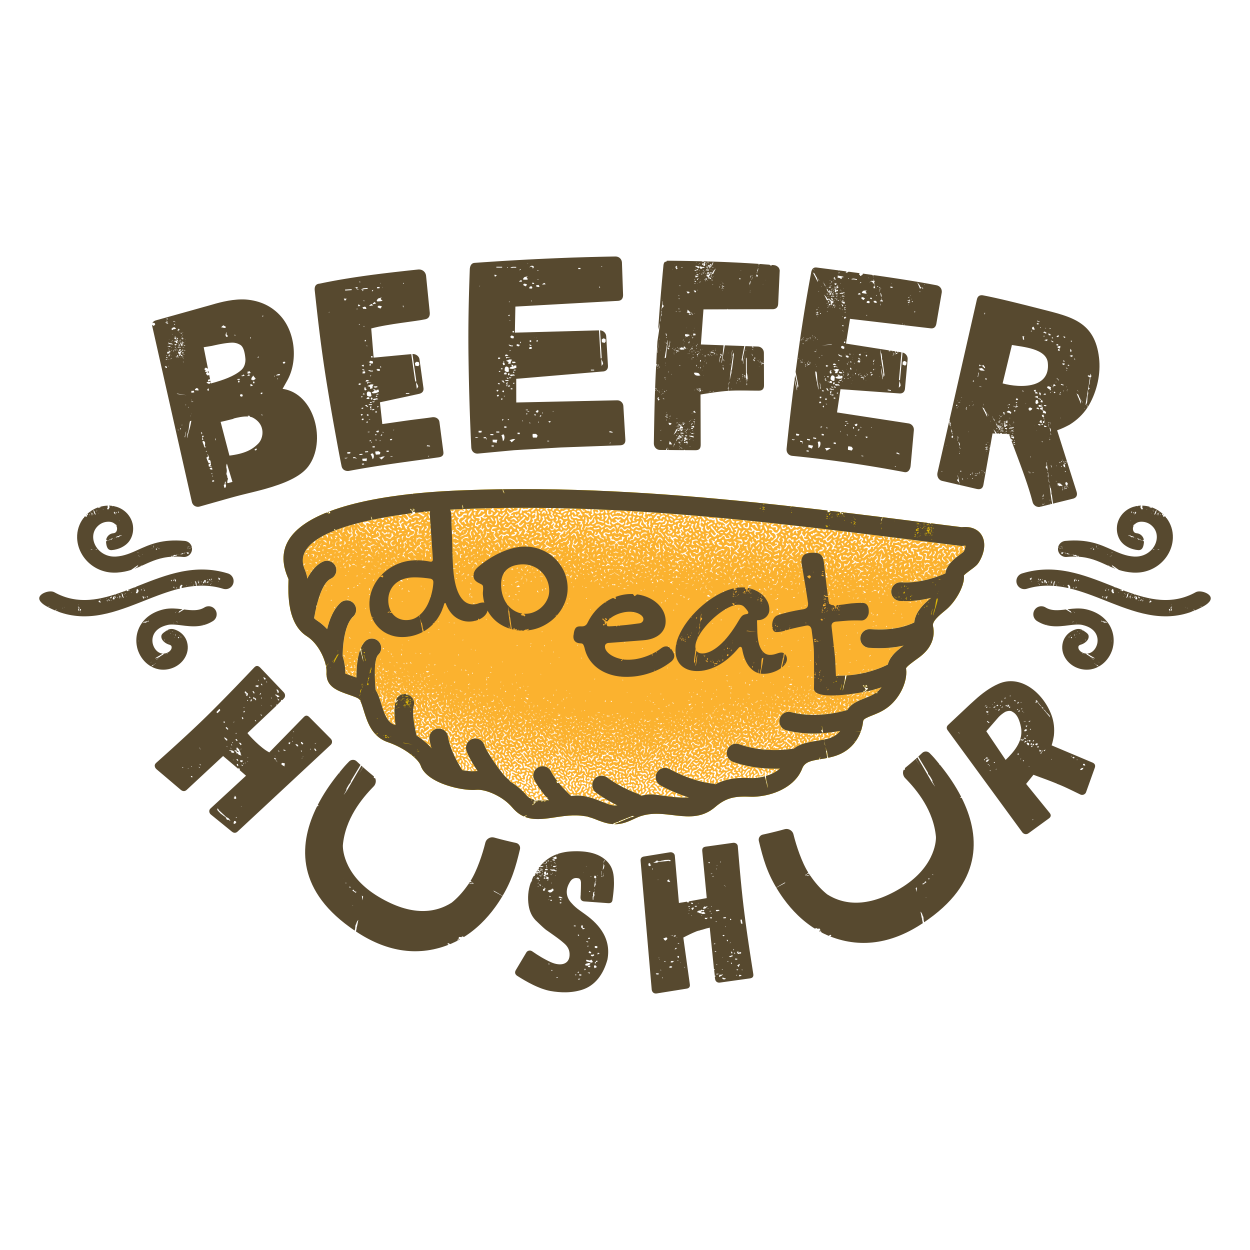 Beefer+Huushuur logo design by logo designer Ido for your inspiration and for the worlds largest logo competition